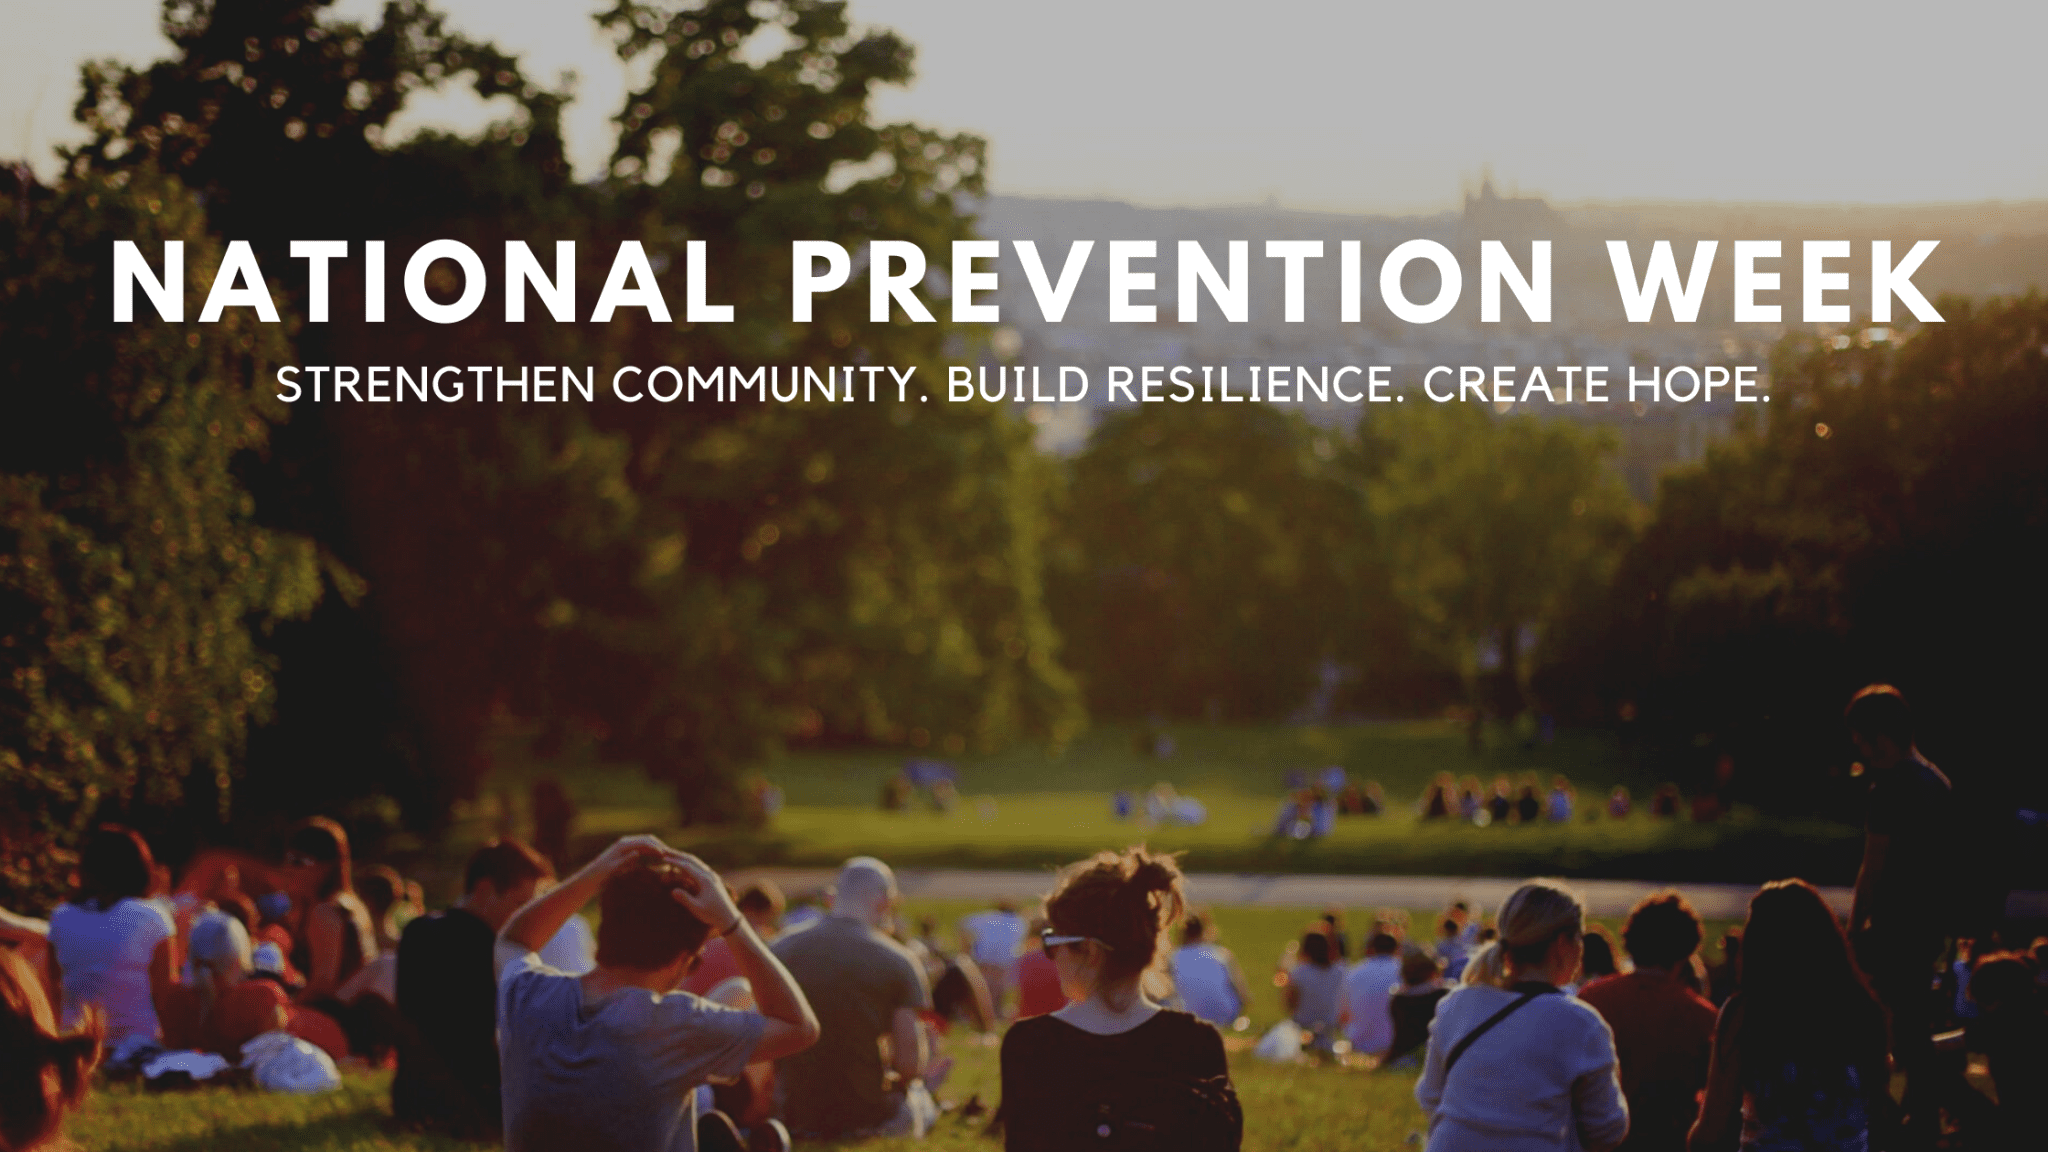 National Prevention Week